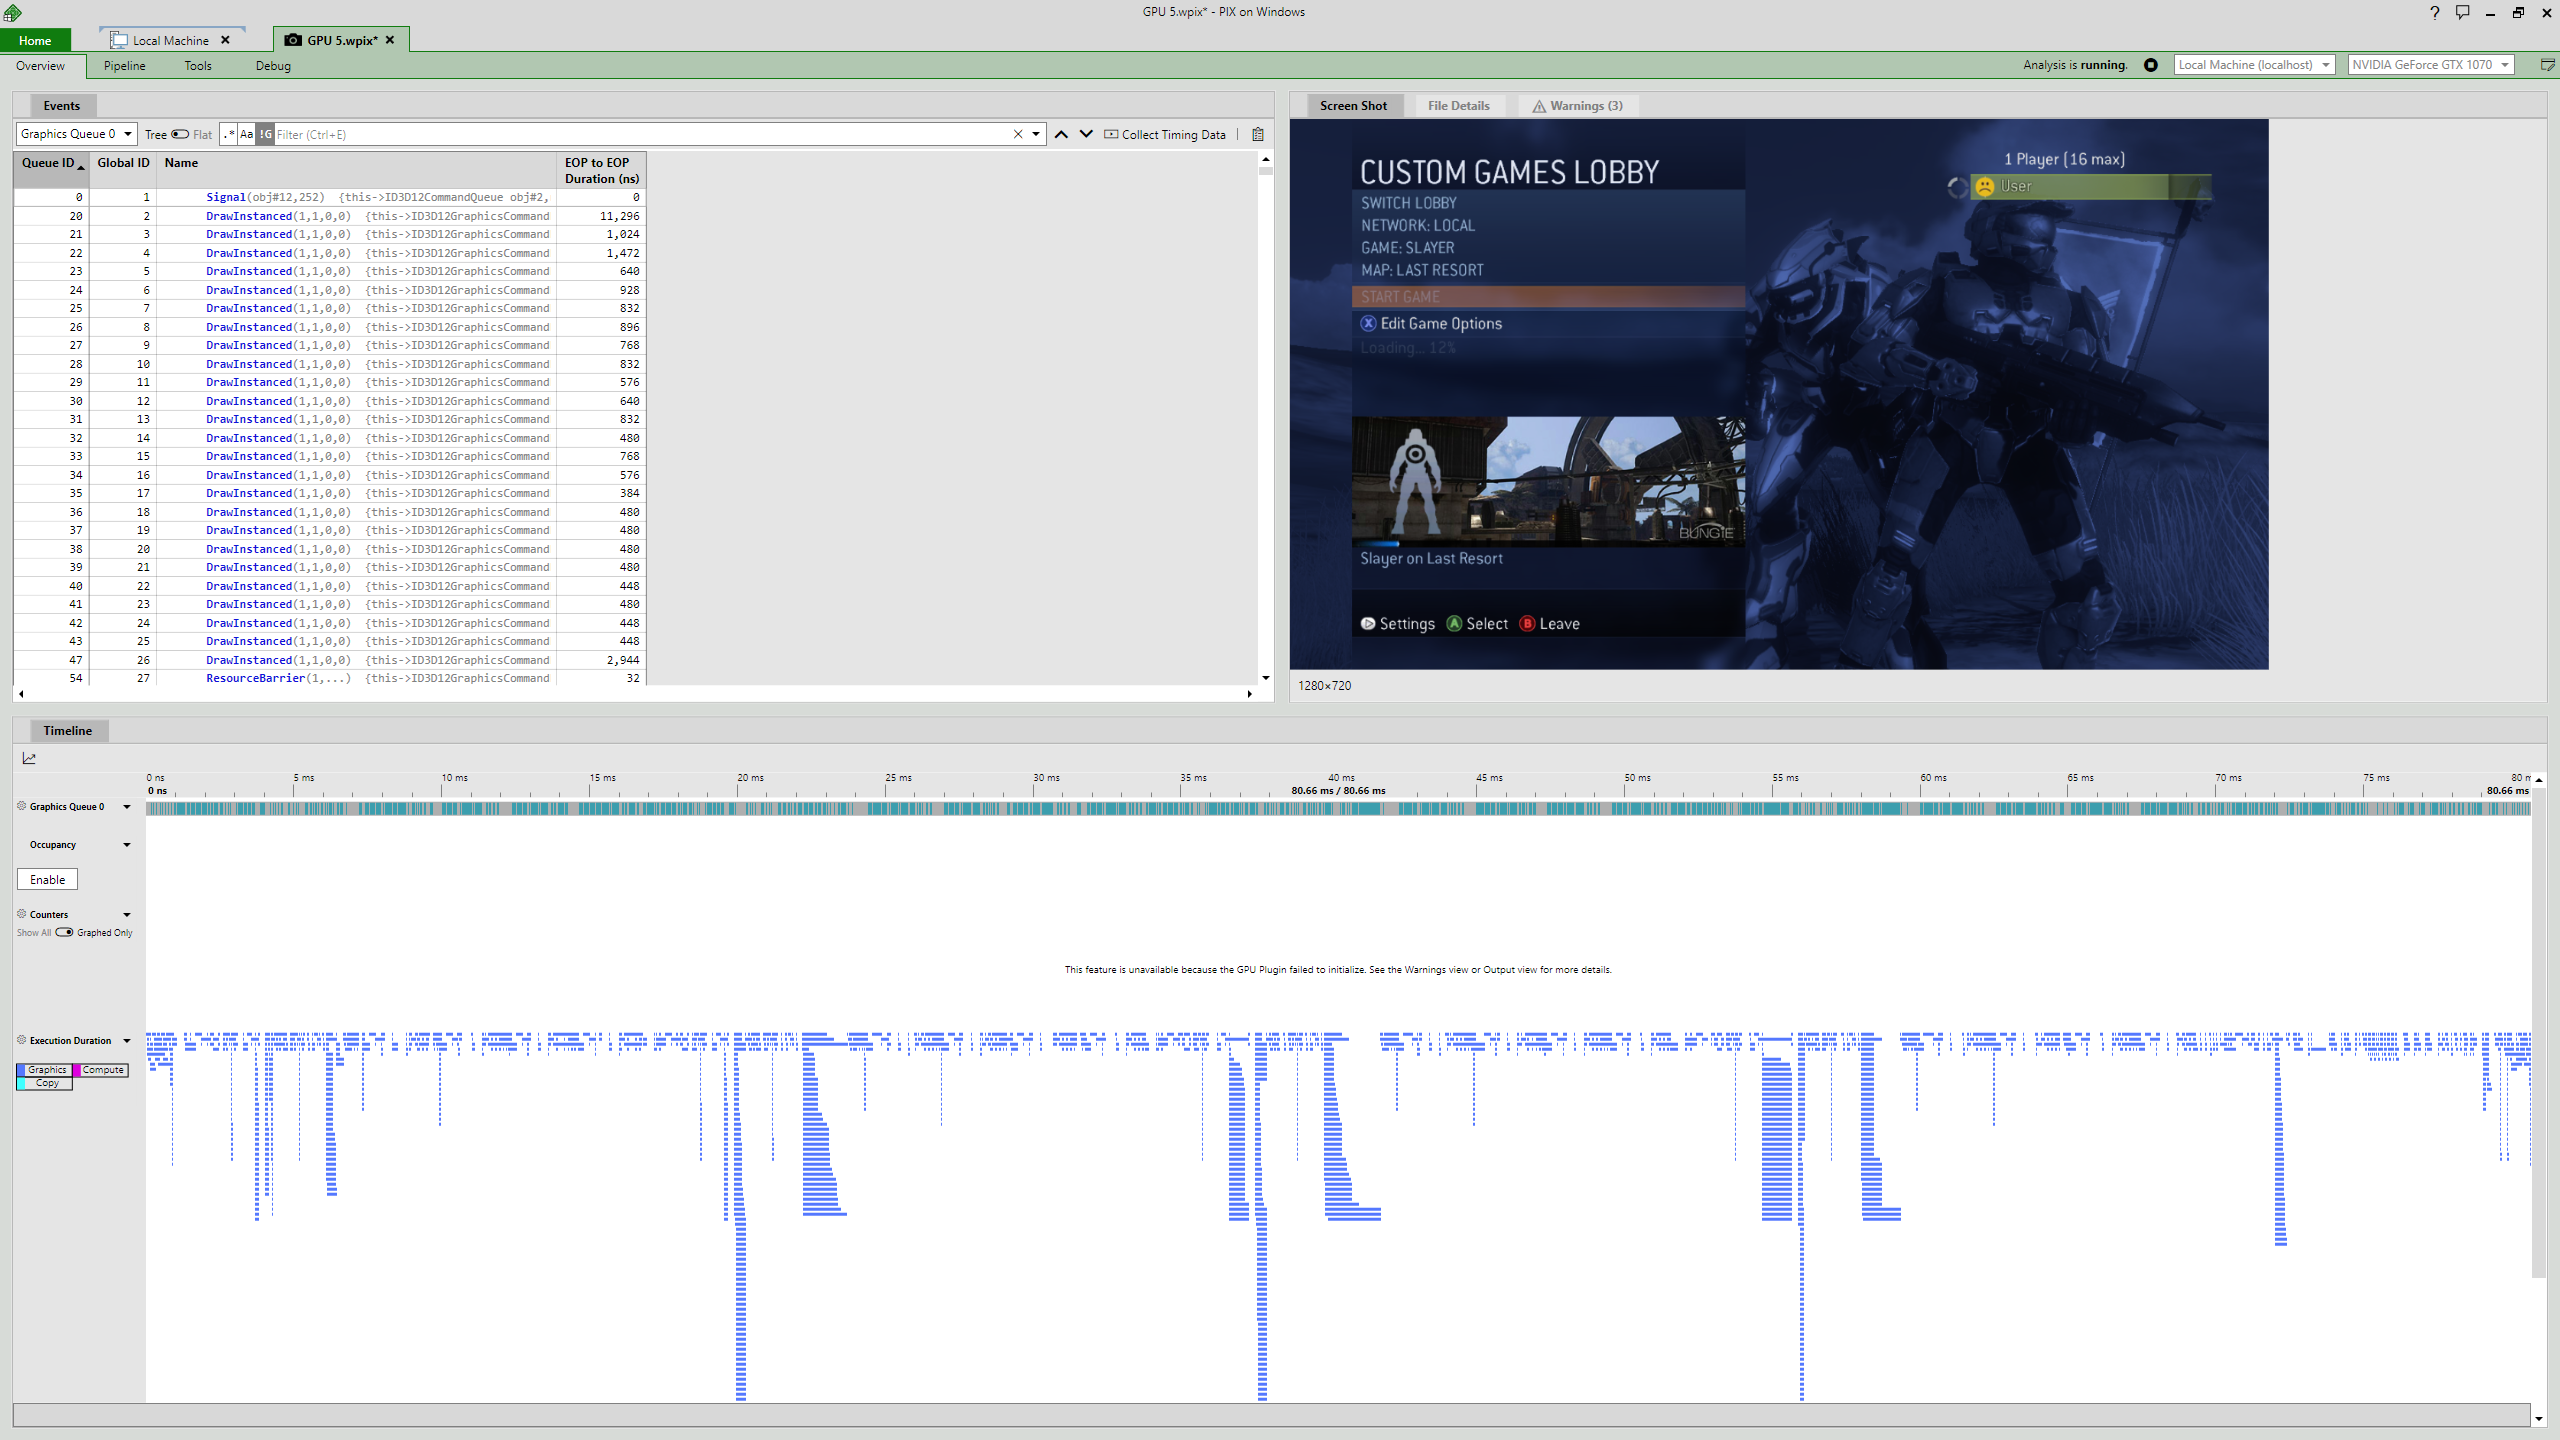 80 milliseconds taken to render a Halo 3 menu frame on the old render target implementation, with many GPU operations done sequentially rather than in parallel